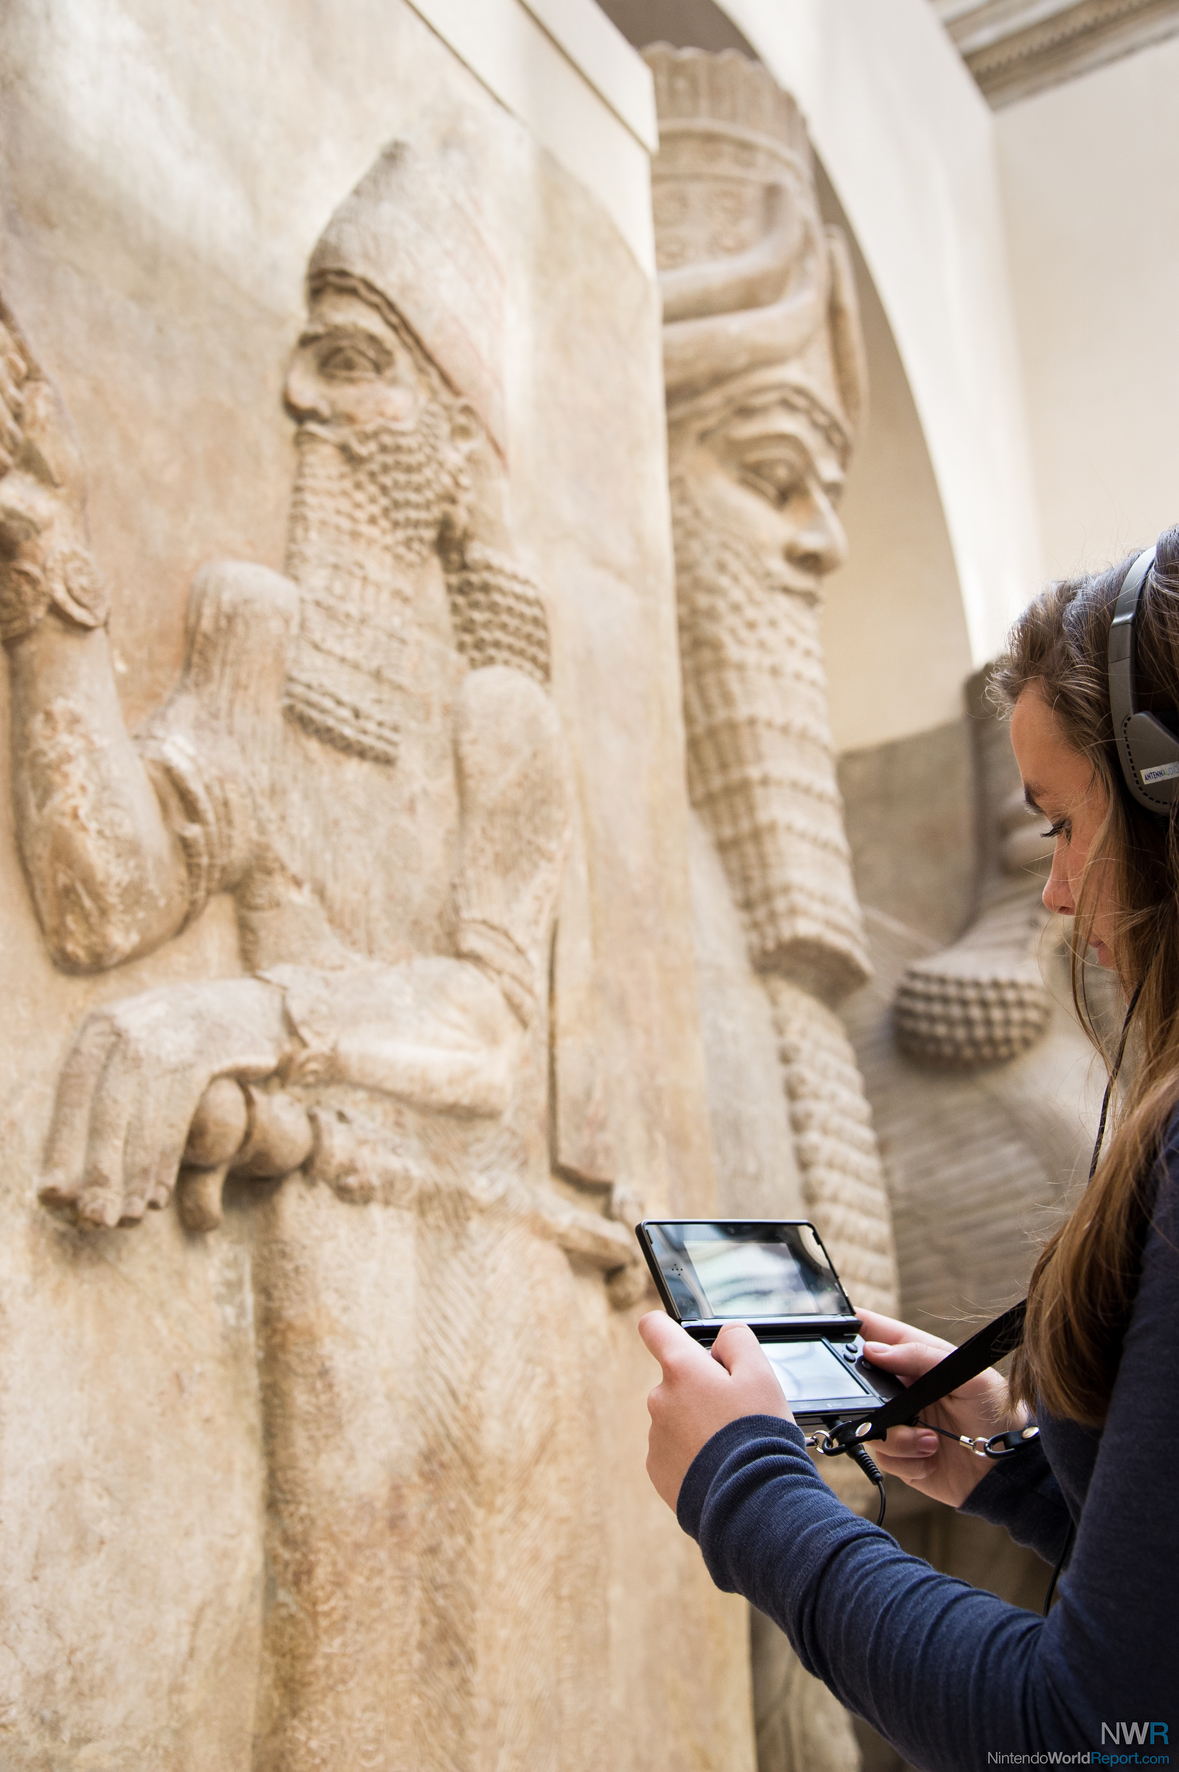 Nintendo 3DS Audio Guides Available at Louvre Museum - News - Nintendo  World Report